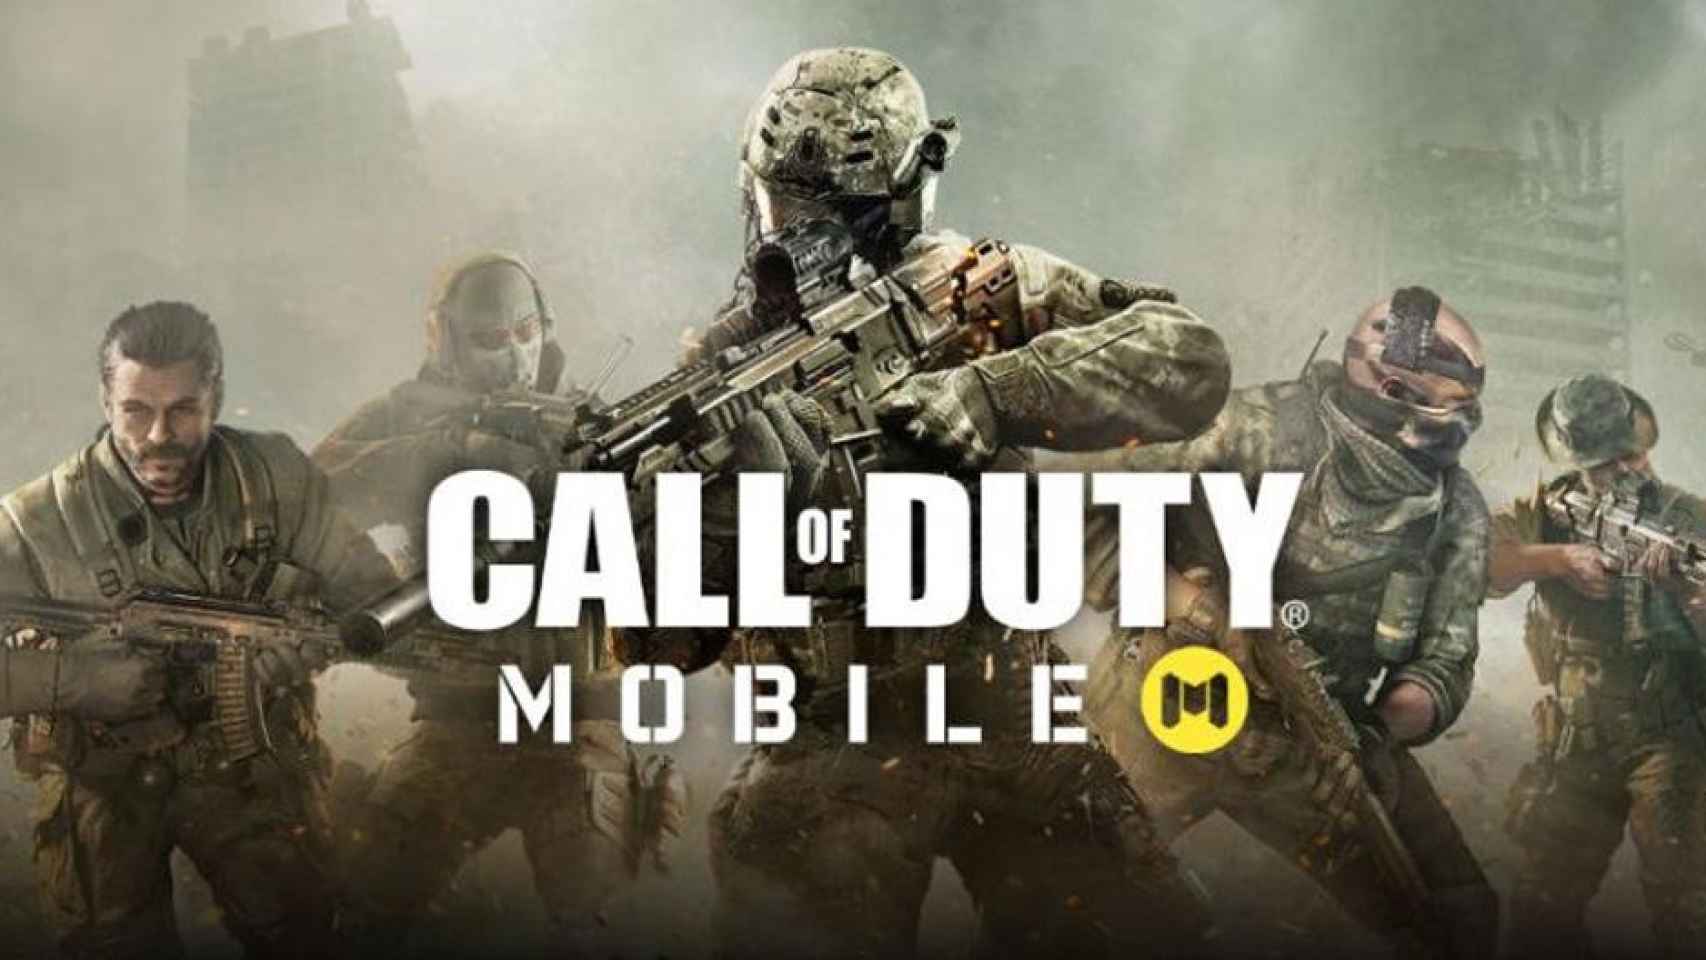 ‘Call of Duty: Mobile’ / ACTIVISION